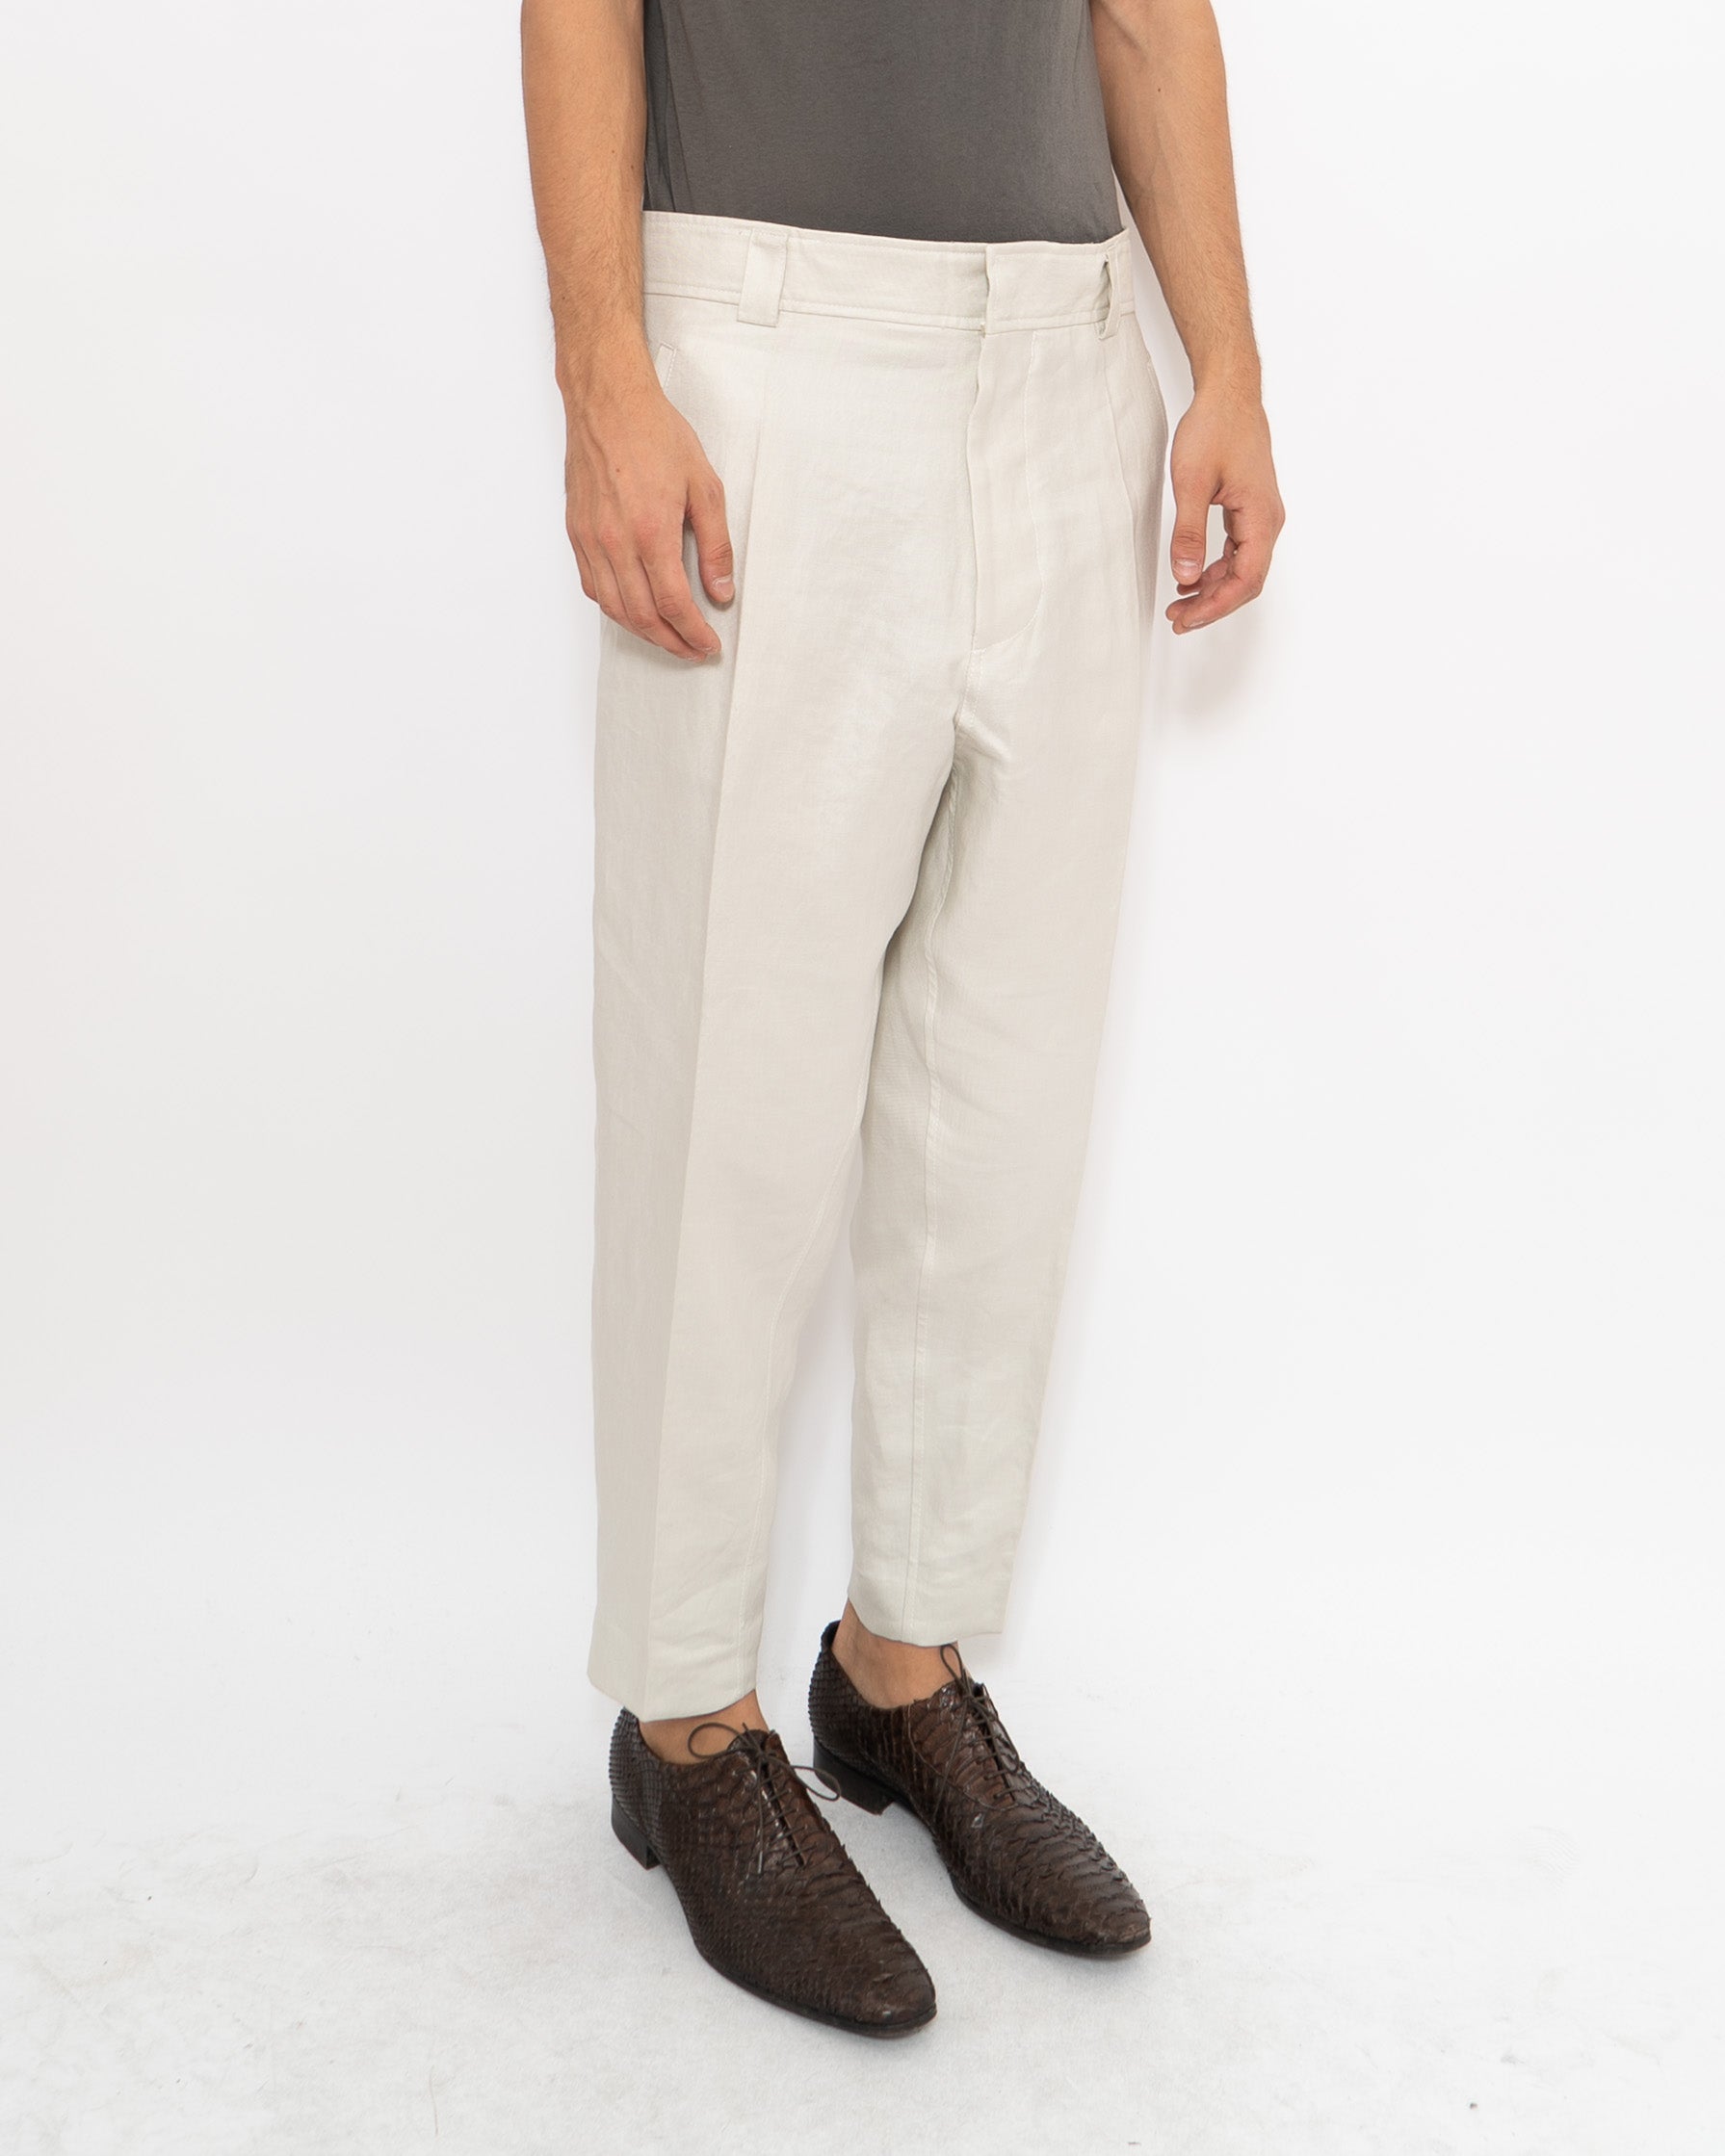 SS15 Cream Sand Cotton Trousers